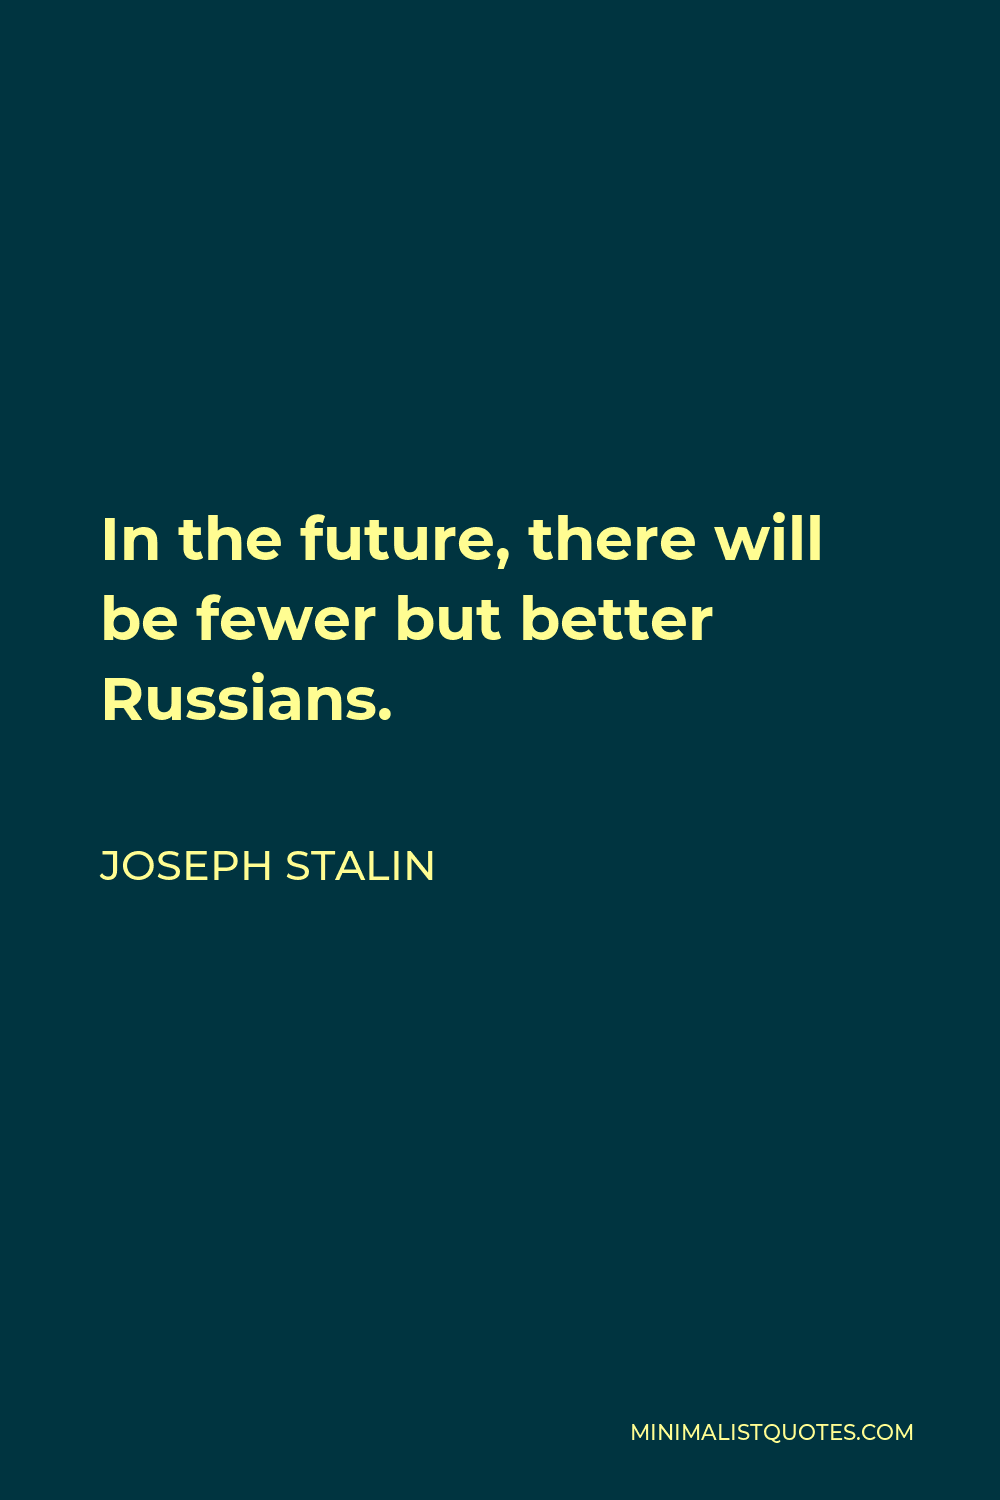 Joseph Stalin Quote - In the future, there will be fewer but better Russians.